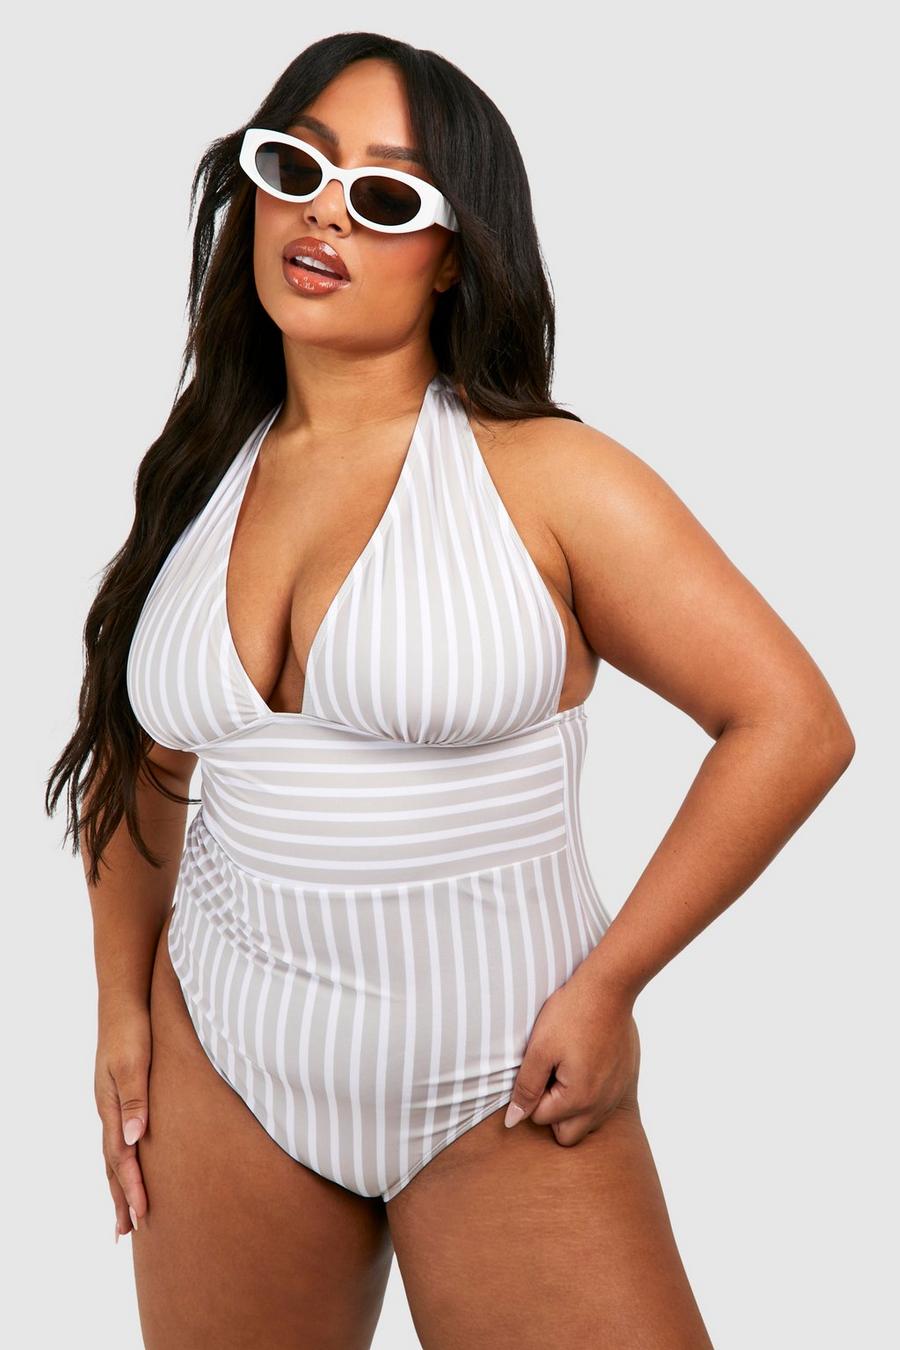 Plunge Swimsuits, Plunge One Piece Swimsuits